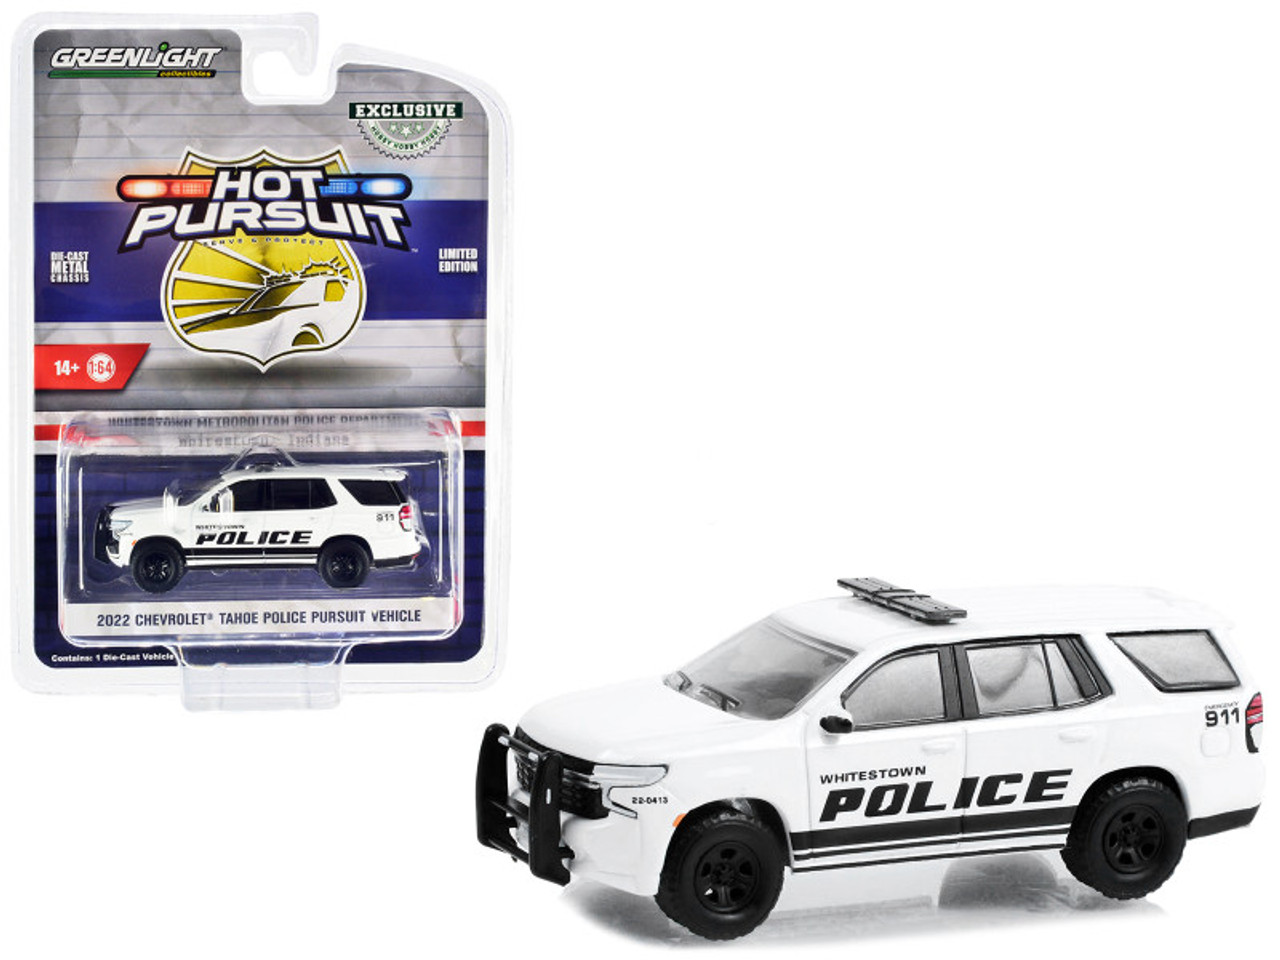 2022 Chevrolet Tahoe Police Pursuit Vehicle (PPV) "Whitestown Metropolitan Police Department Whitestown Indiana" White with Black Stripes "Hobby Exclusive" Series 1/64 Diecast Model Car by Greenlight